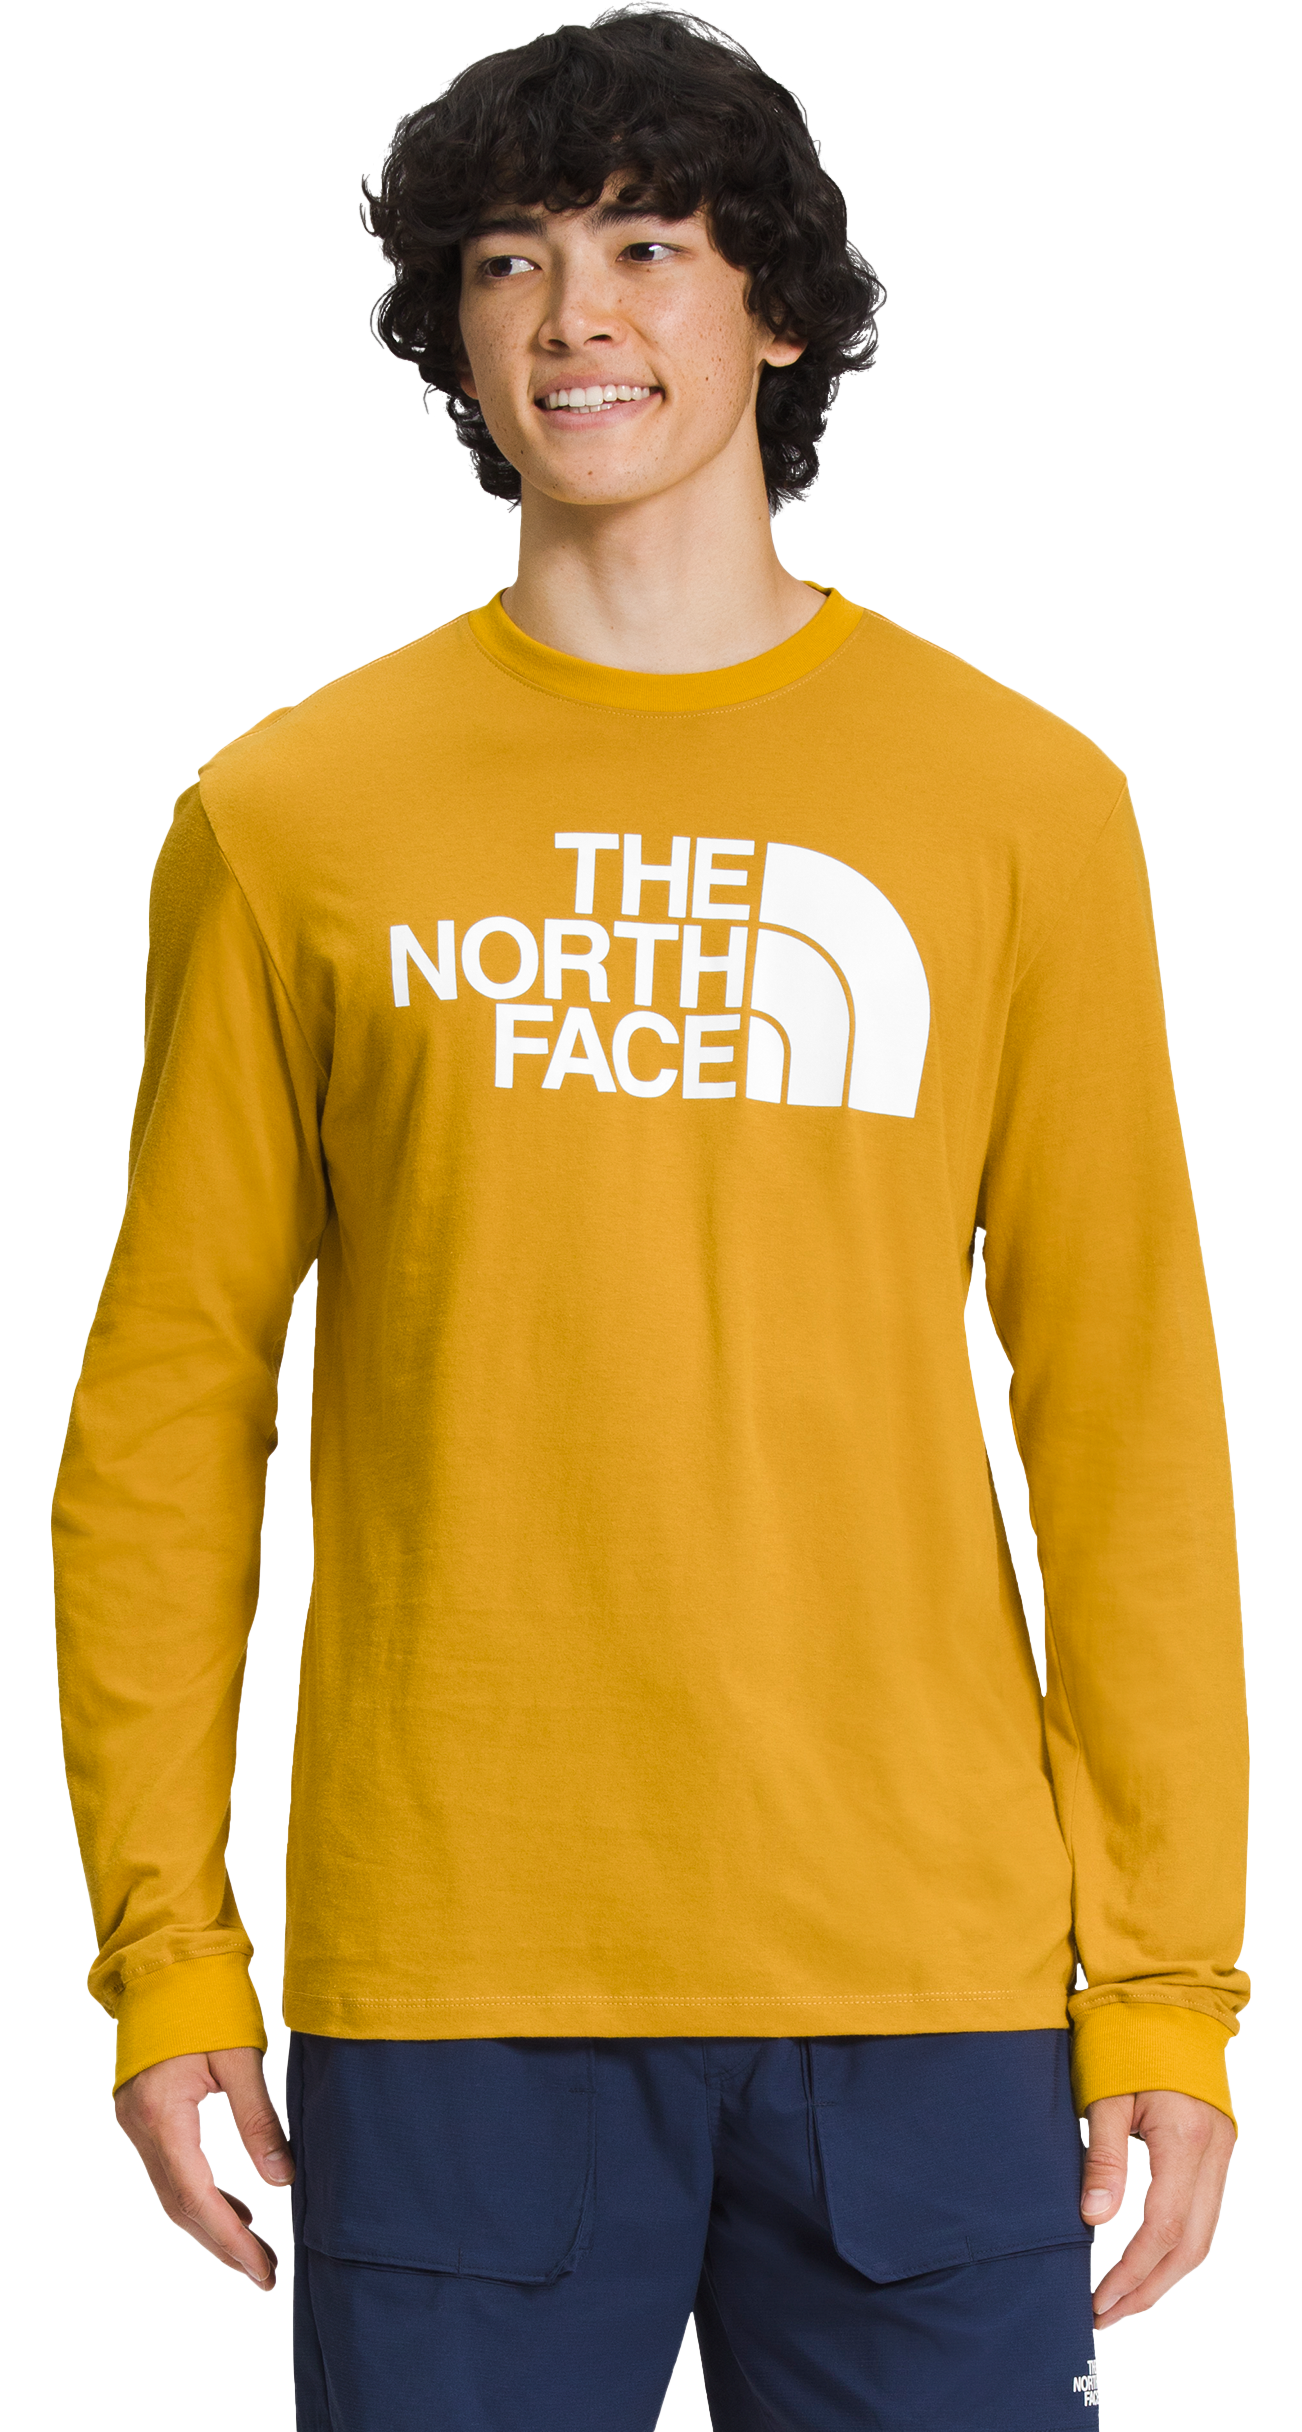 The North Face Half Dome Long-Sleeve T-Shirt for Men - Arrowwood Yellow/TNF White - L